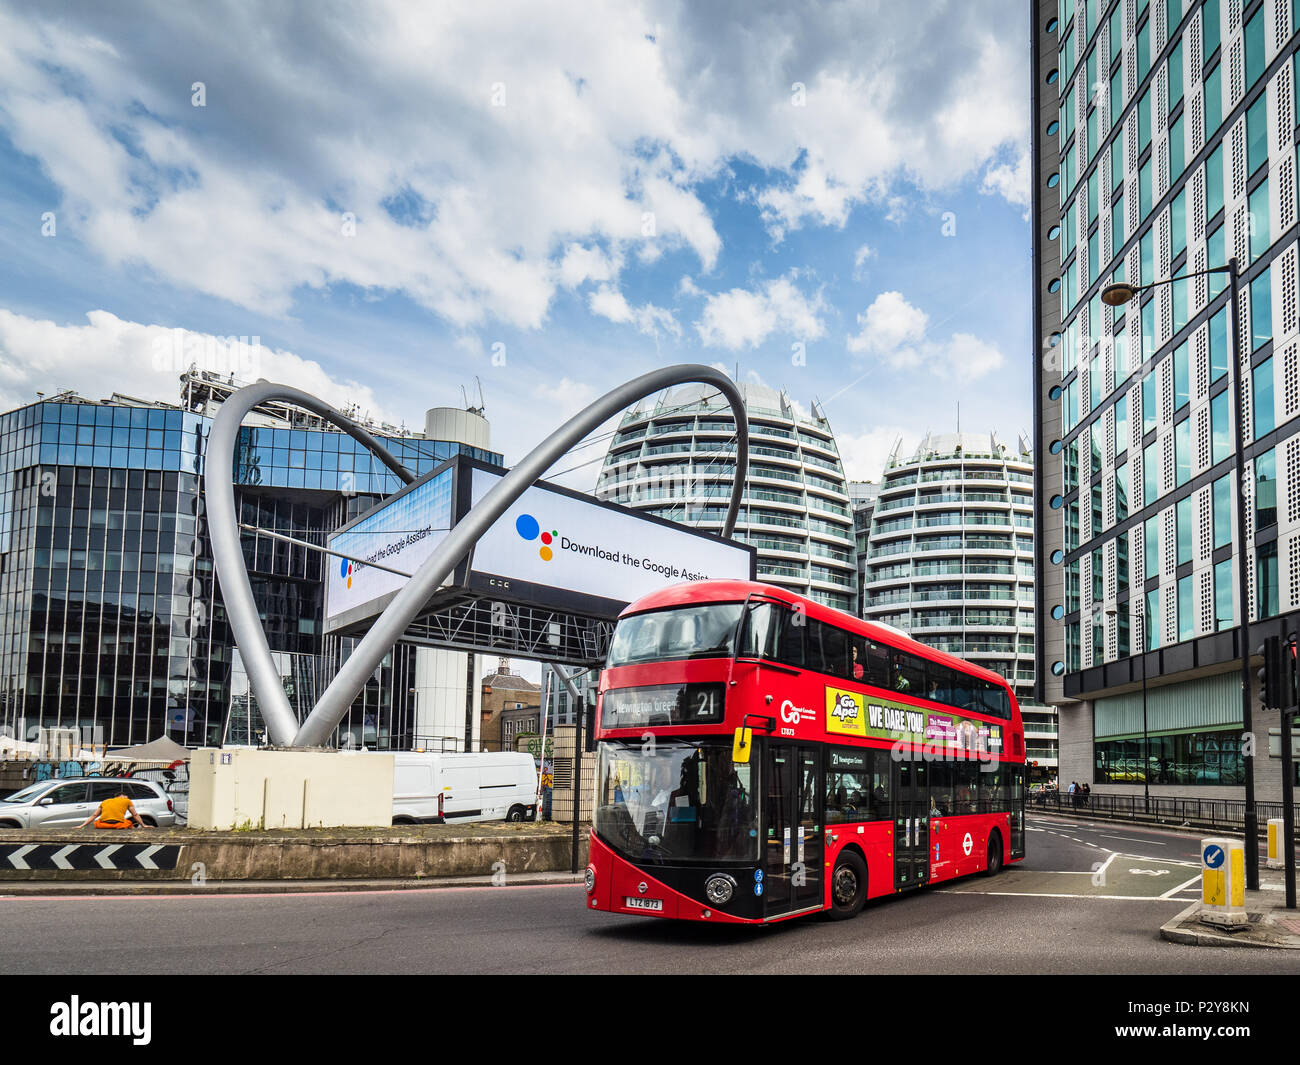 Silicon Roundabout or Old Street Roundabout -  London's tech hub area in the Shoreditch area of central London Stock Photo